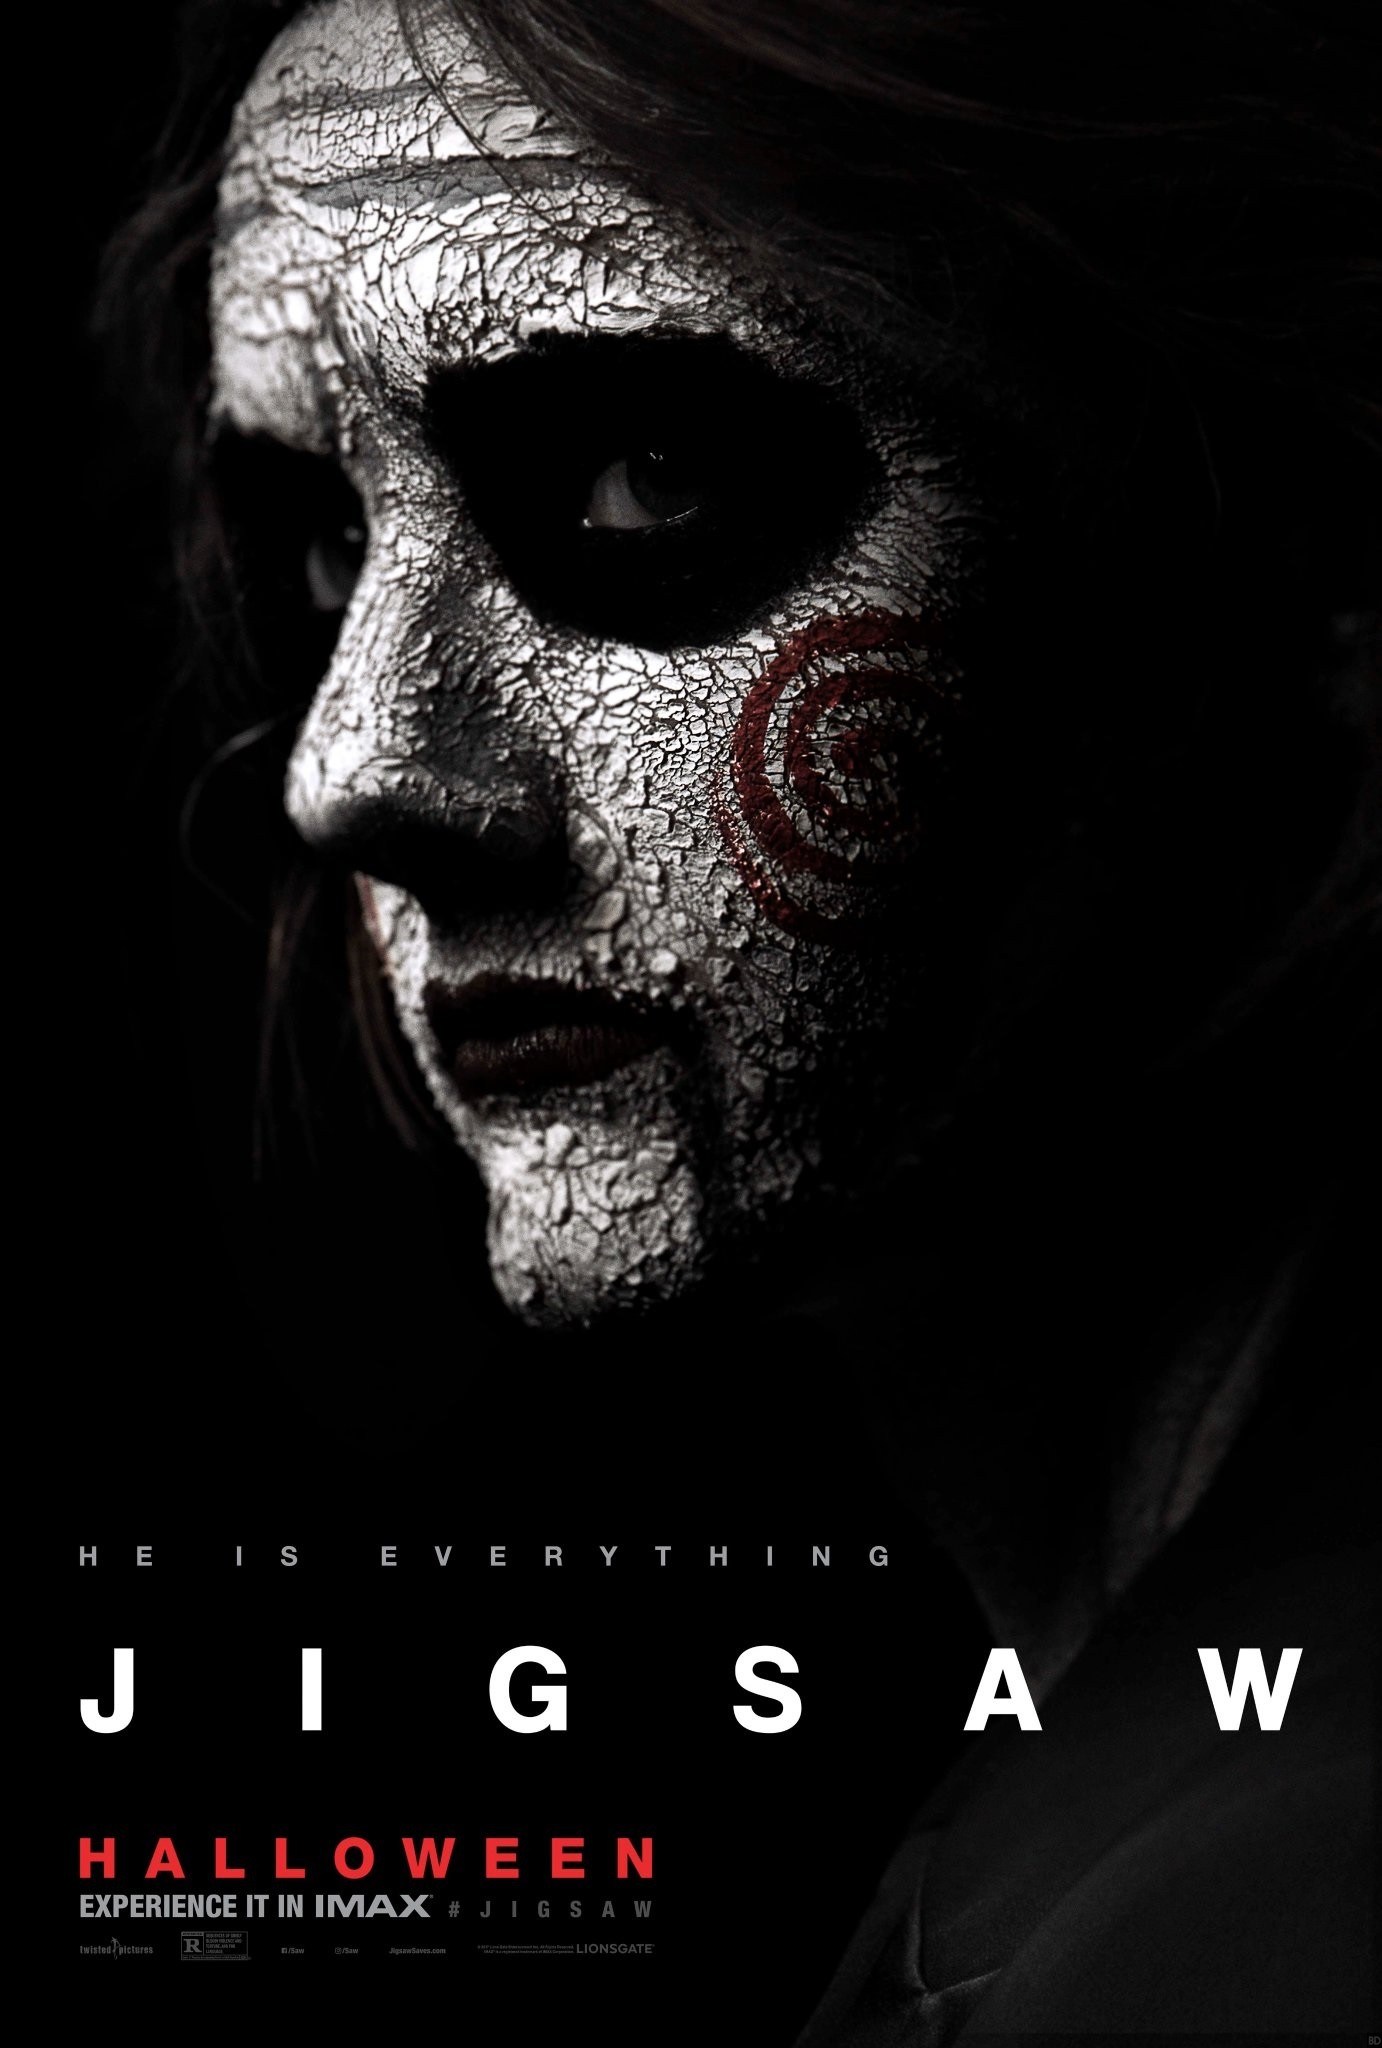 Jigsaw He is Everything